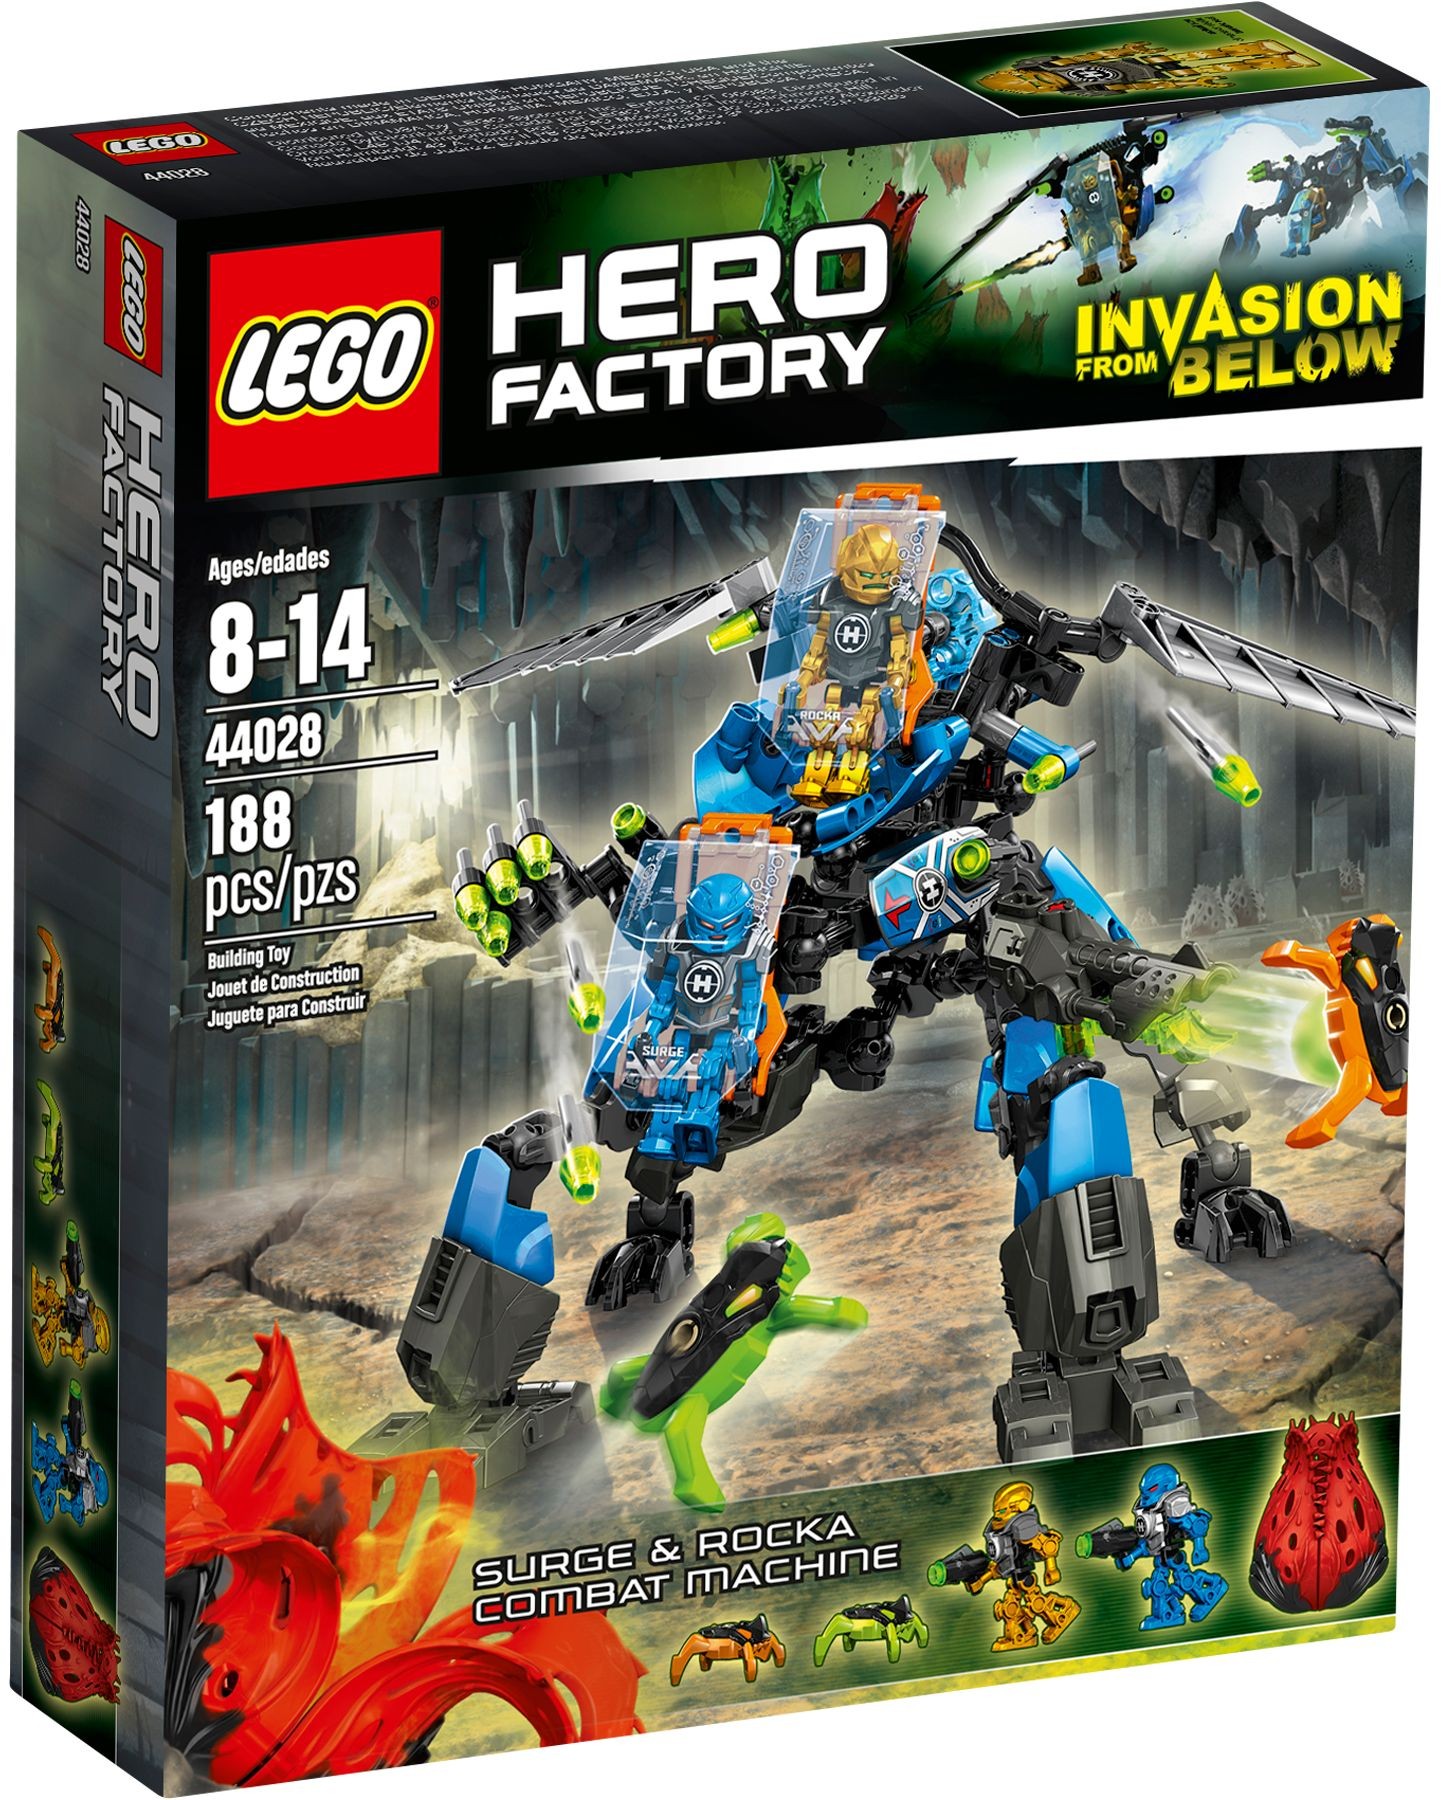 LEGO Hero Factory Rocka Stealth Machine 44019 Invasion From Below New Sealed 